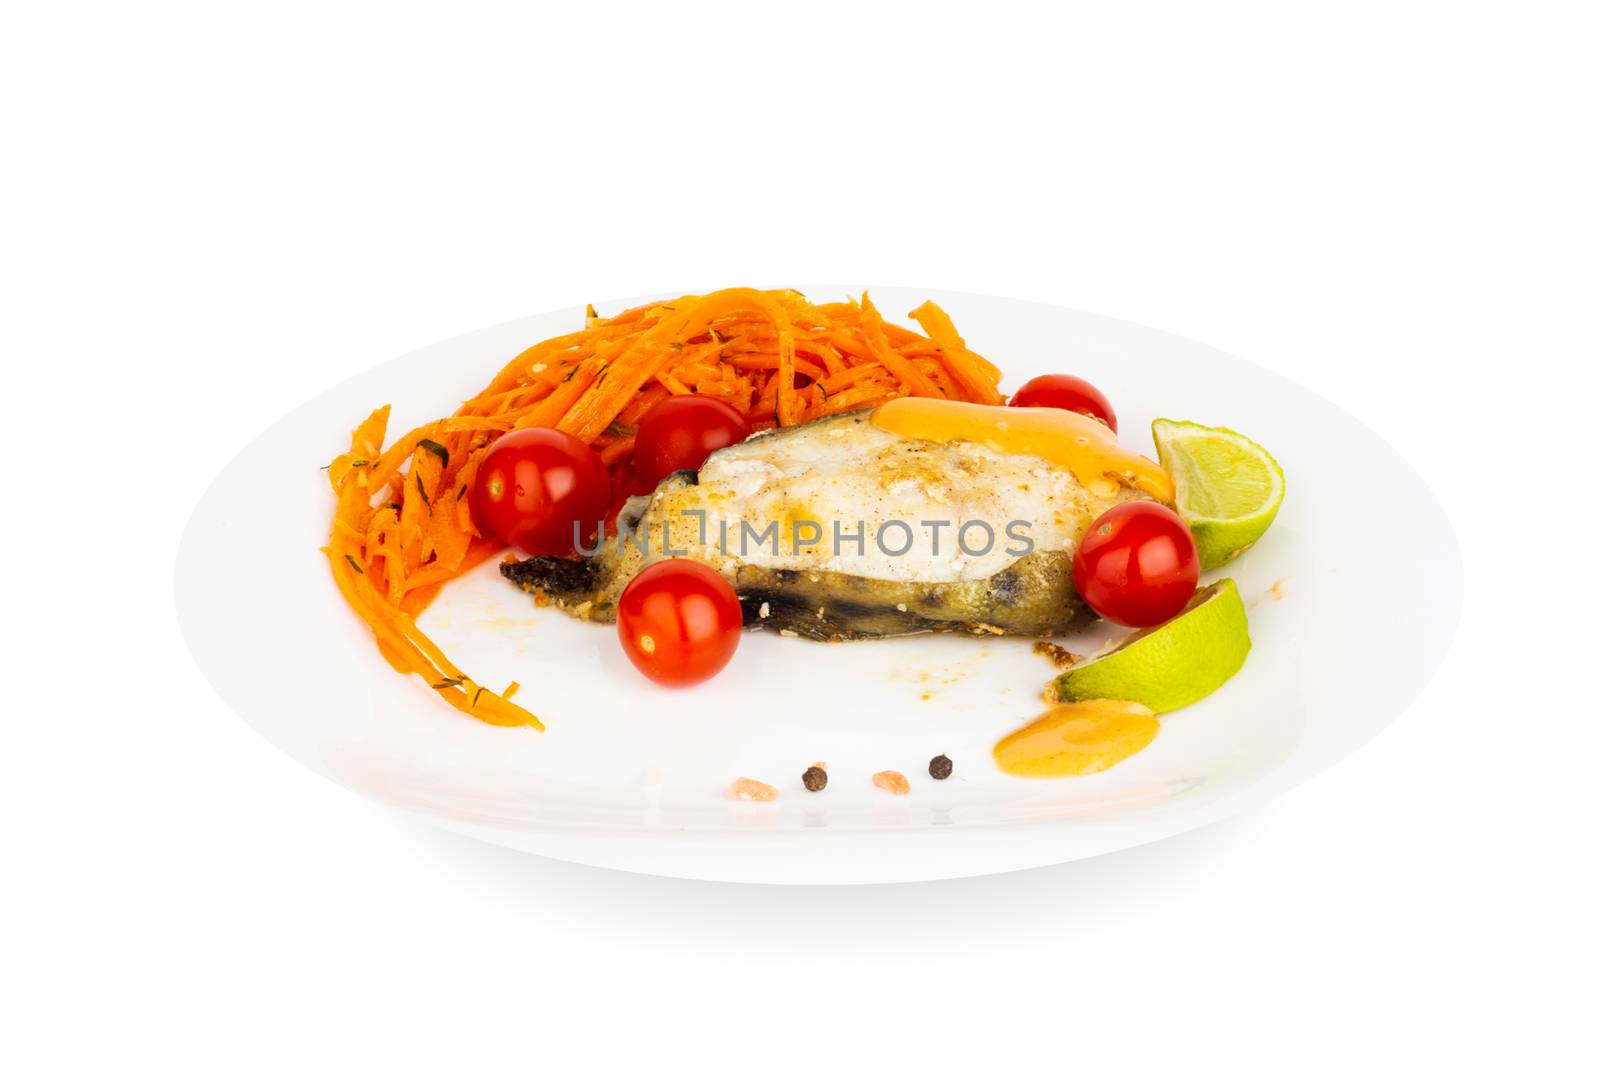 Fried cooked catfish steak with garnish of sauce and vegetables on white plate isolated on white background